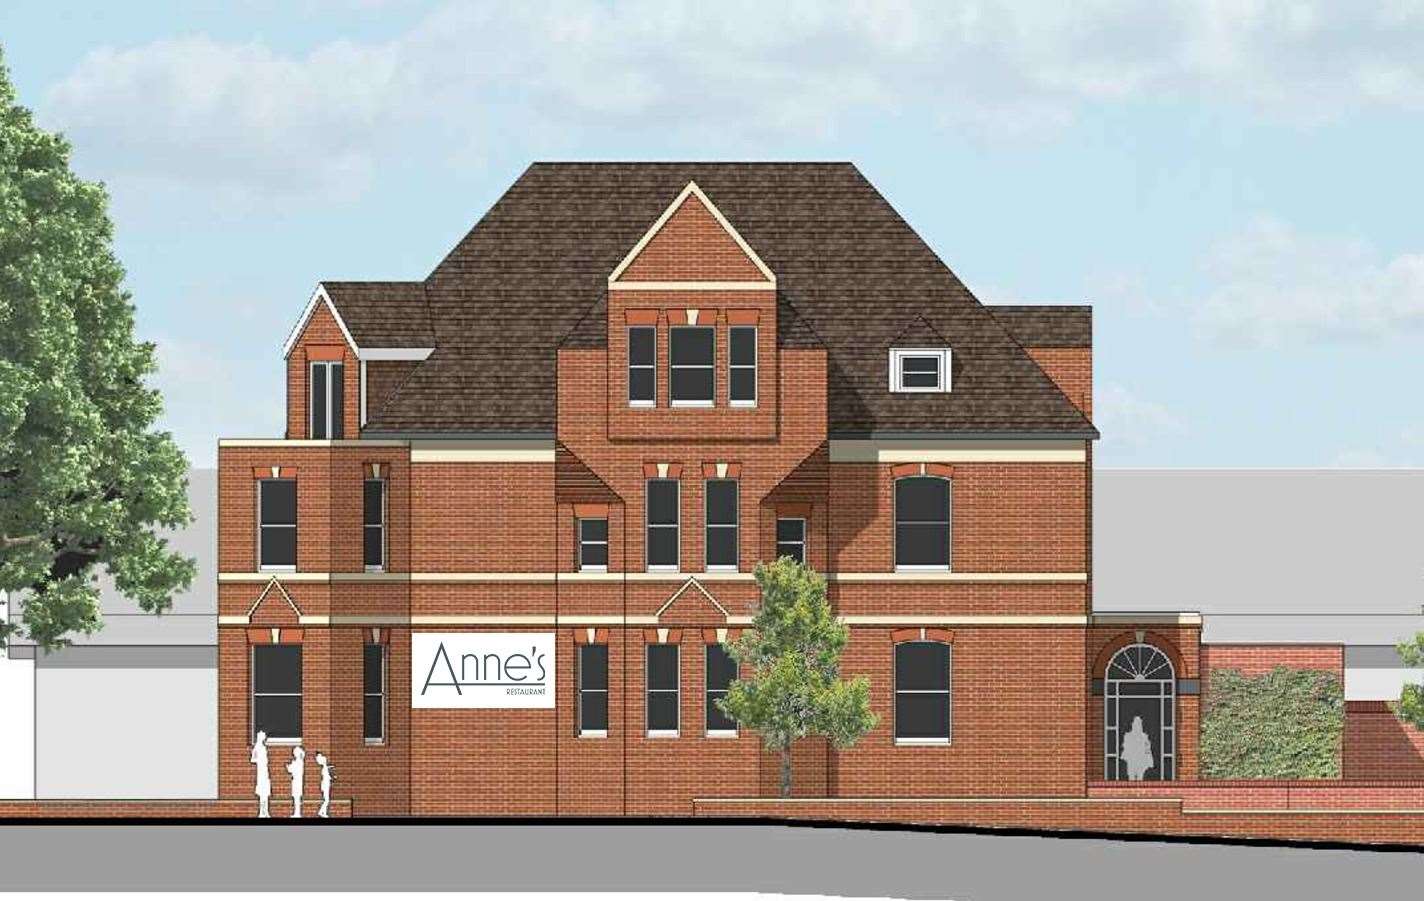 How Anne's Restaurant in Folkestone will look when complete